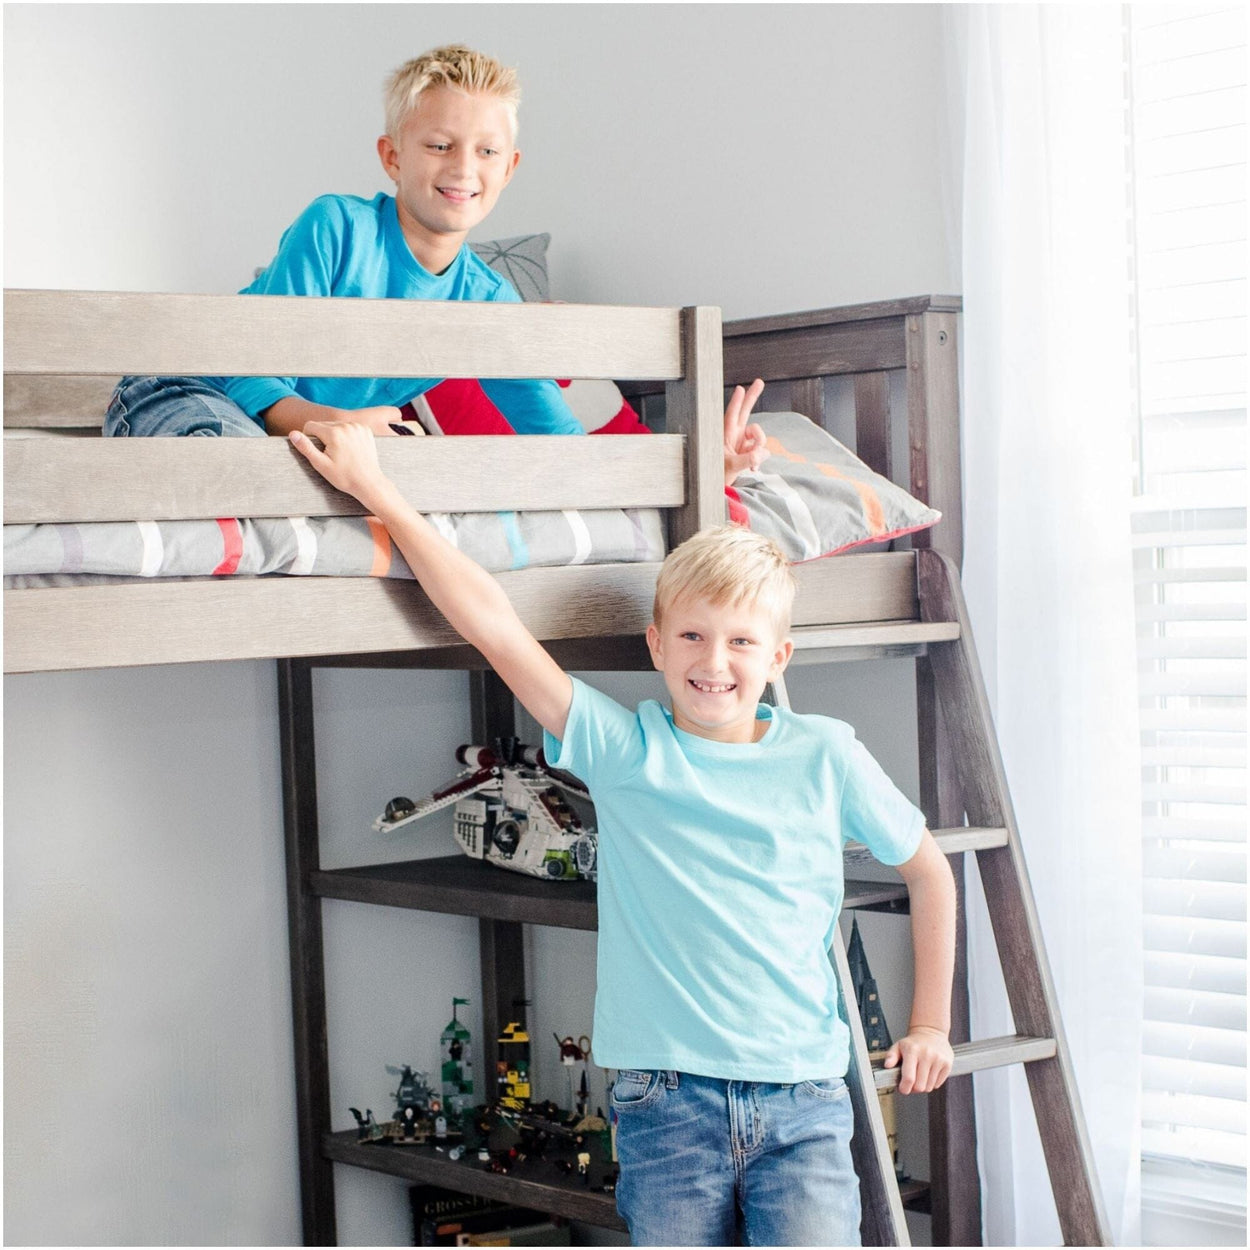 180218-151 : Loft Beds Twin-Size High Loft Bed with Bookcase, Clay